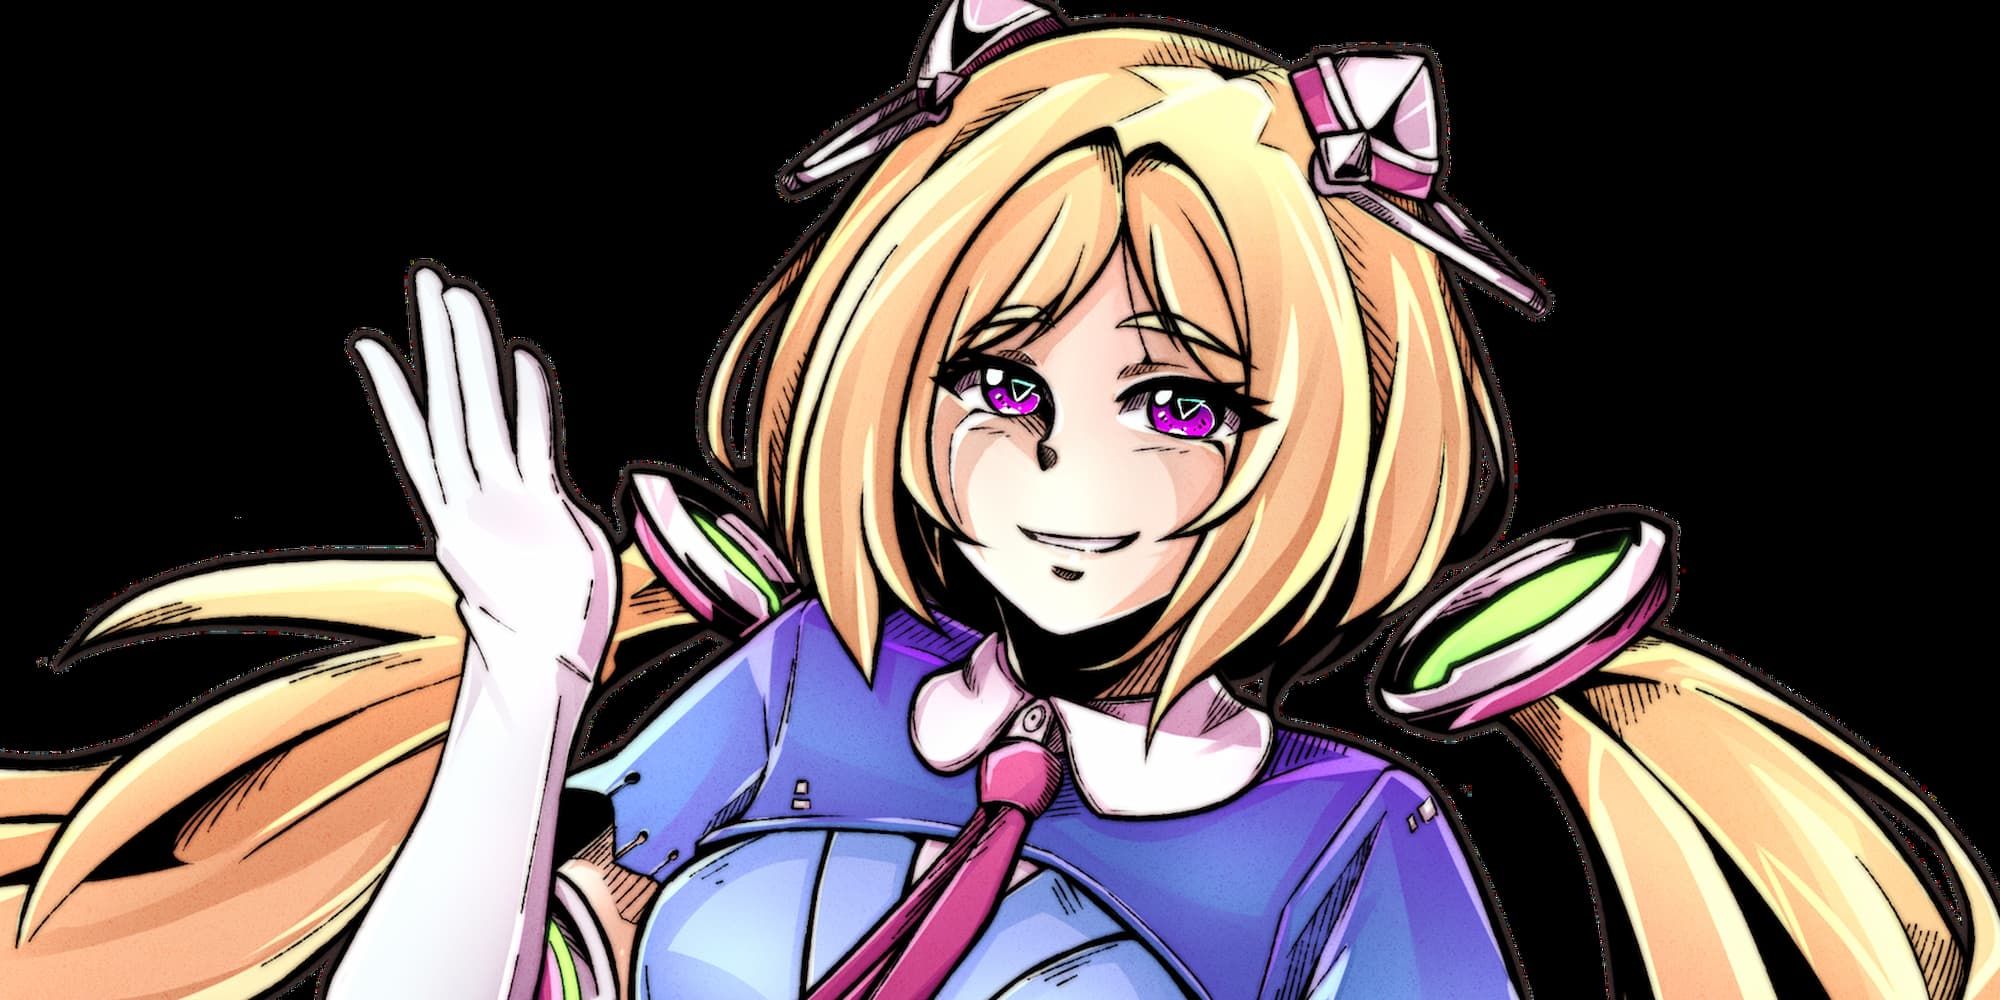 Aki Rosenthal smiling and raising a gloved hand in the Idol Showdown portrait.